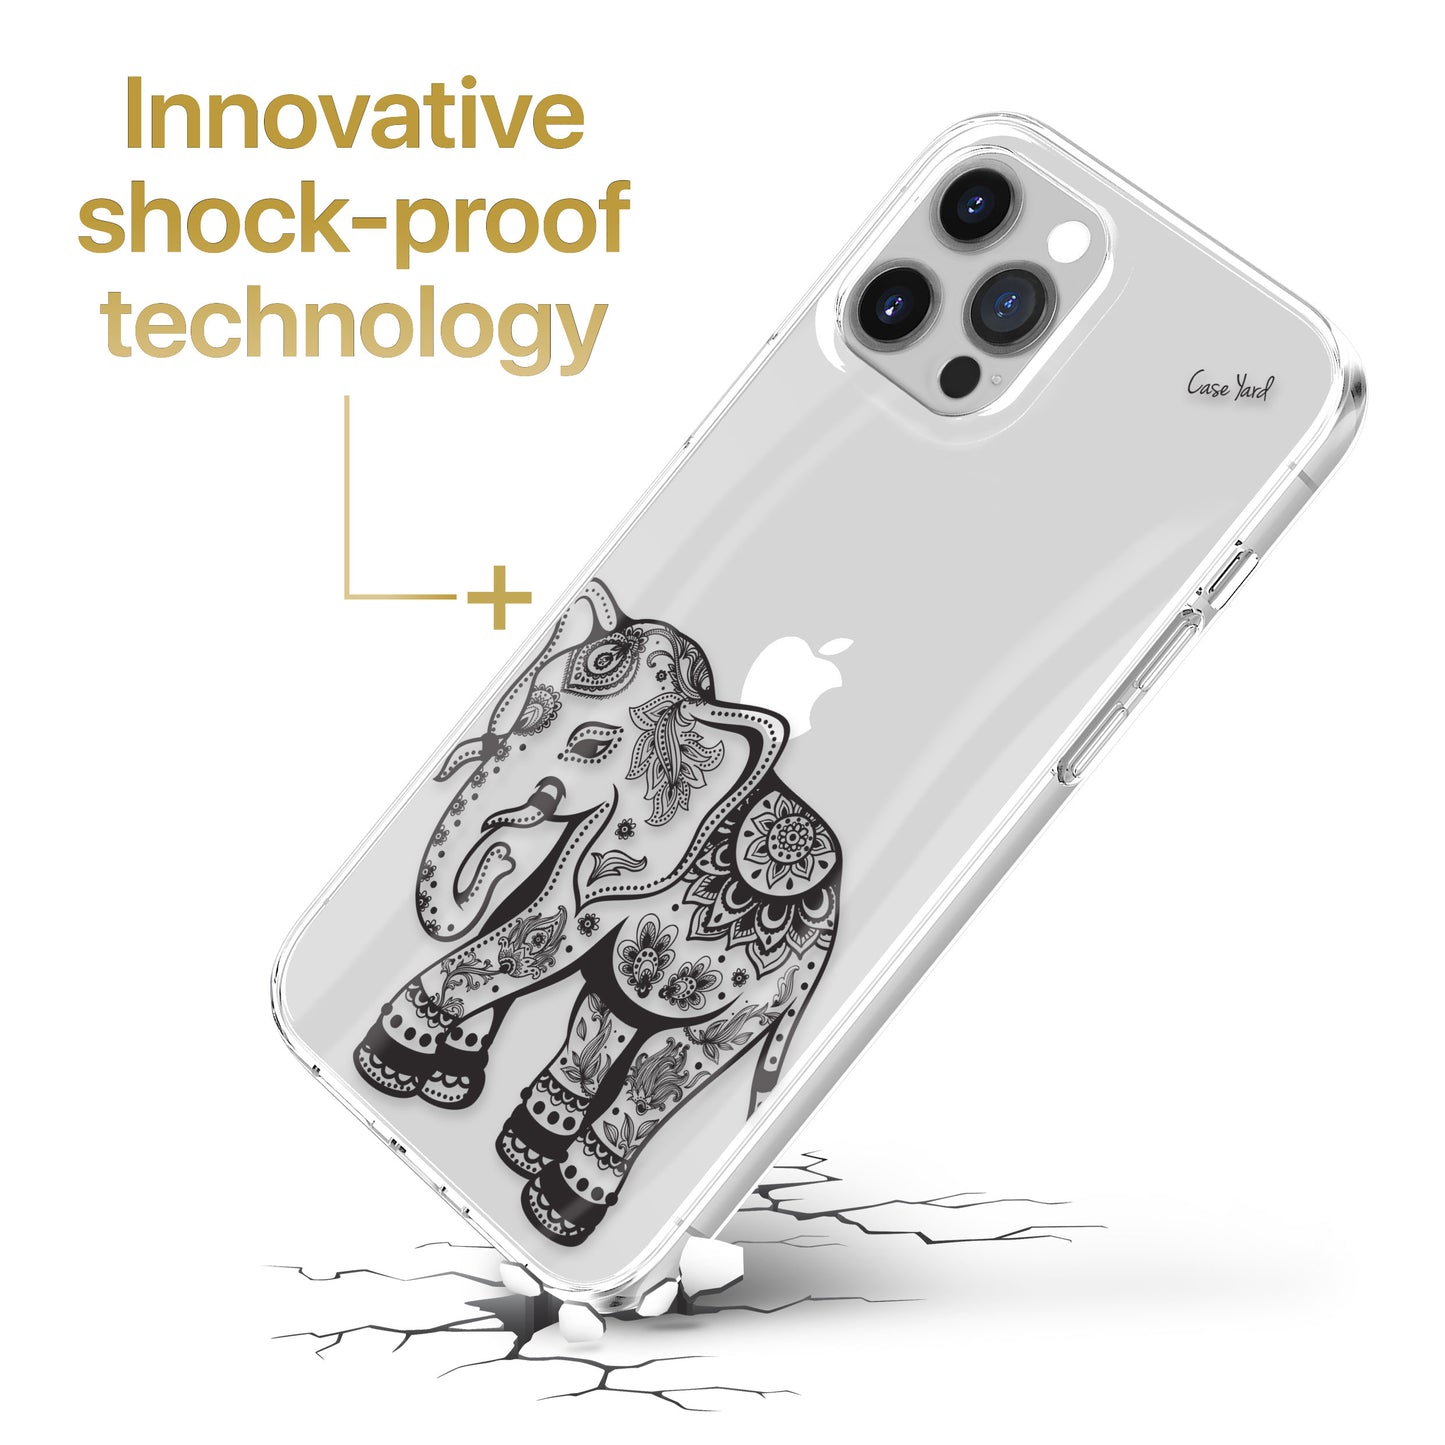 TPU Clear case with (Elephant 2) Design for iPhone & Samsung Phones